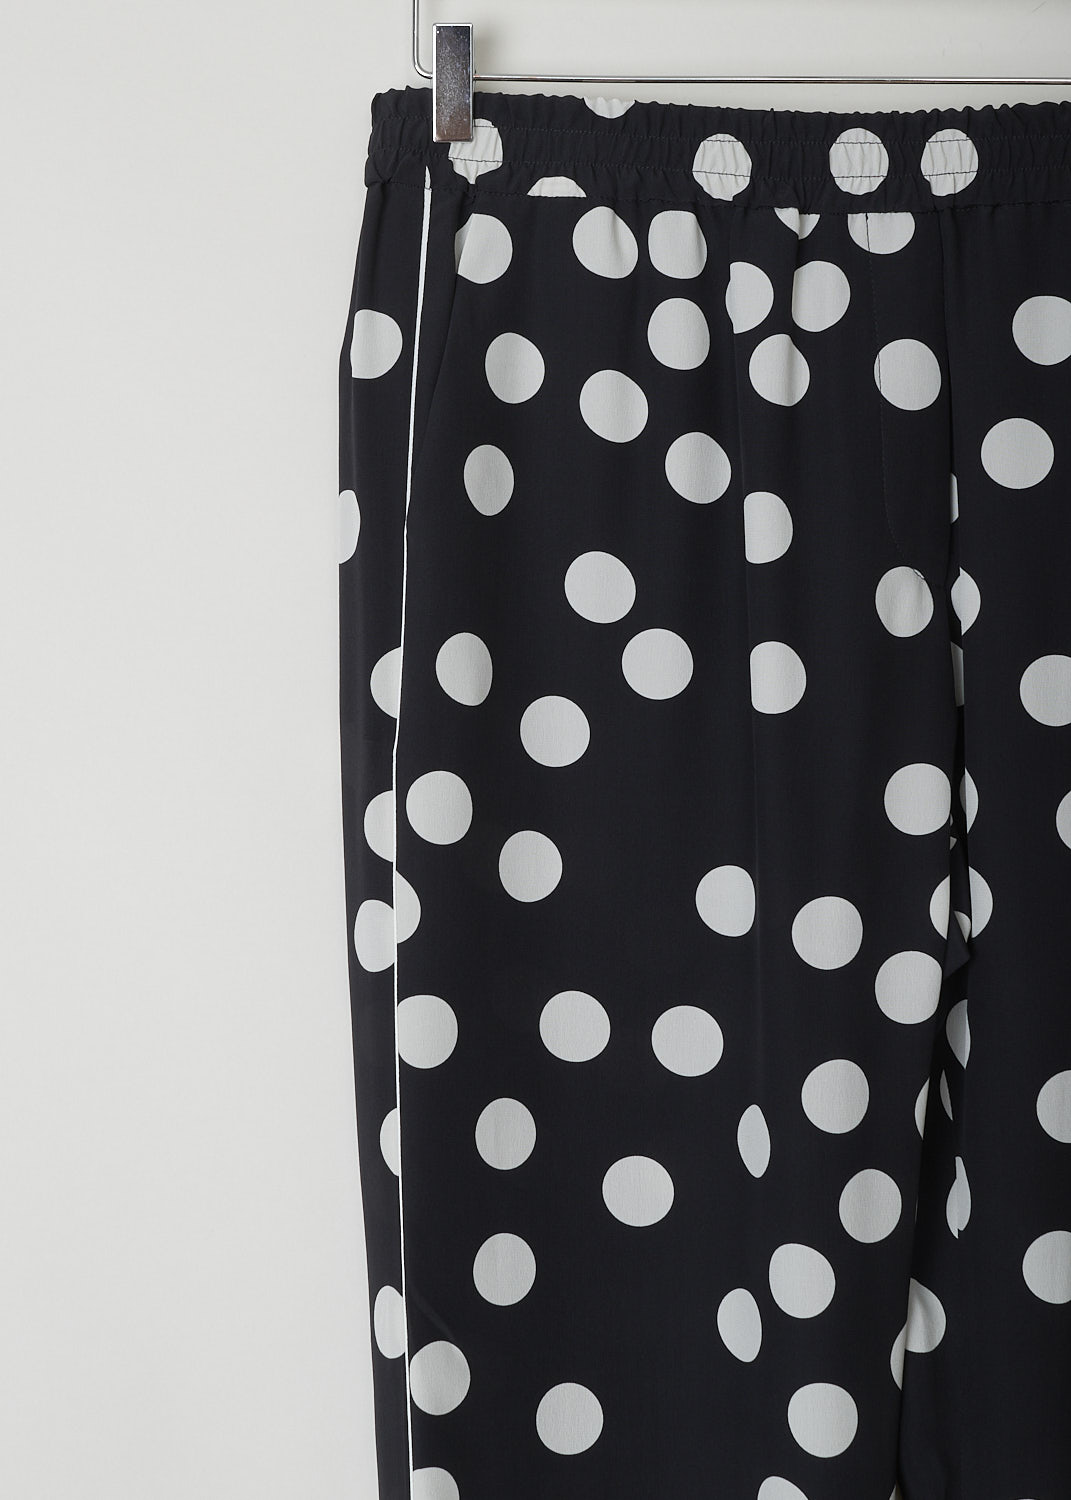 VALENTINO, HIGH WAISTED BLACK PANTS WITH WHITE DOTS, VB3RB43565N_0NA, Black, White, Print, Detail, These high waisted black silk pants have an irregular doted print in white. These slip-on pants have an elasticated waistline with a drawstring on the inside. The straight, ankle length pant legs have white piping along side seams. In the front, these pants have slanted pockets and in the back welt pockets can be found.
